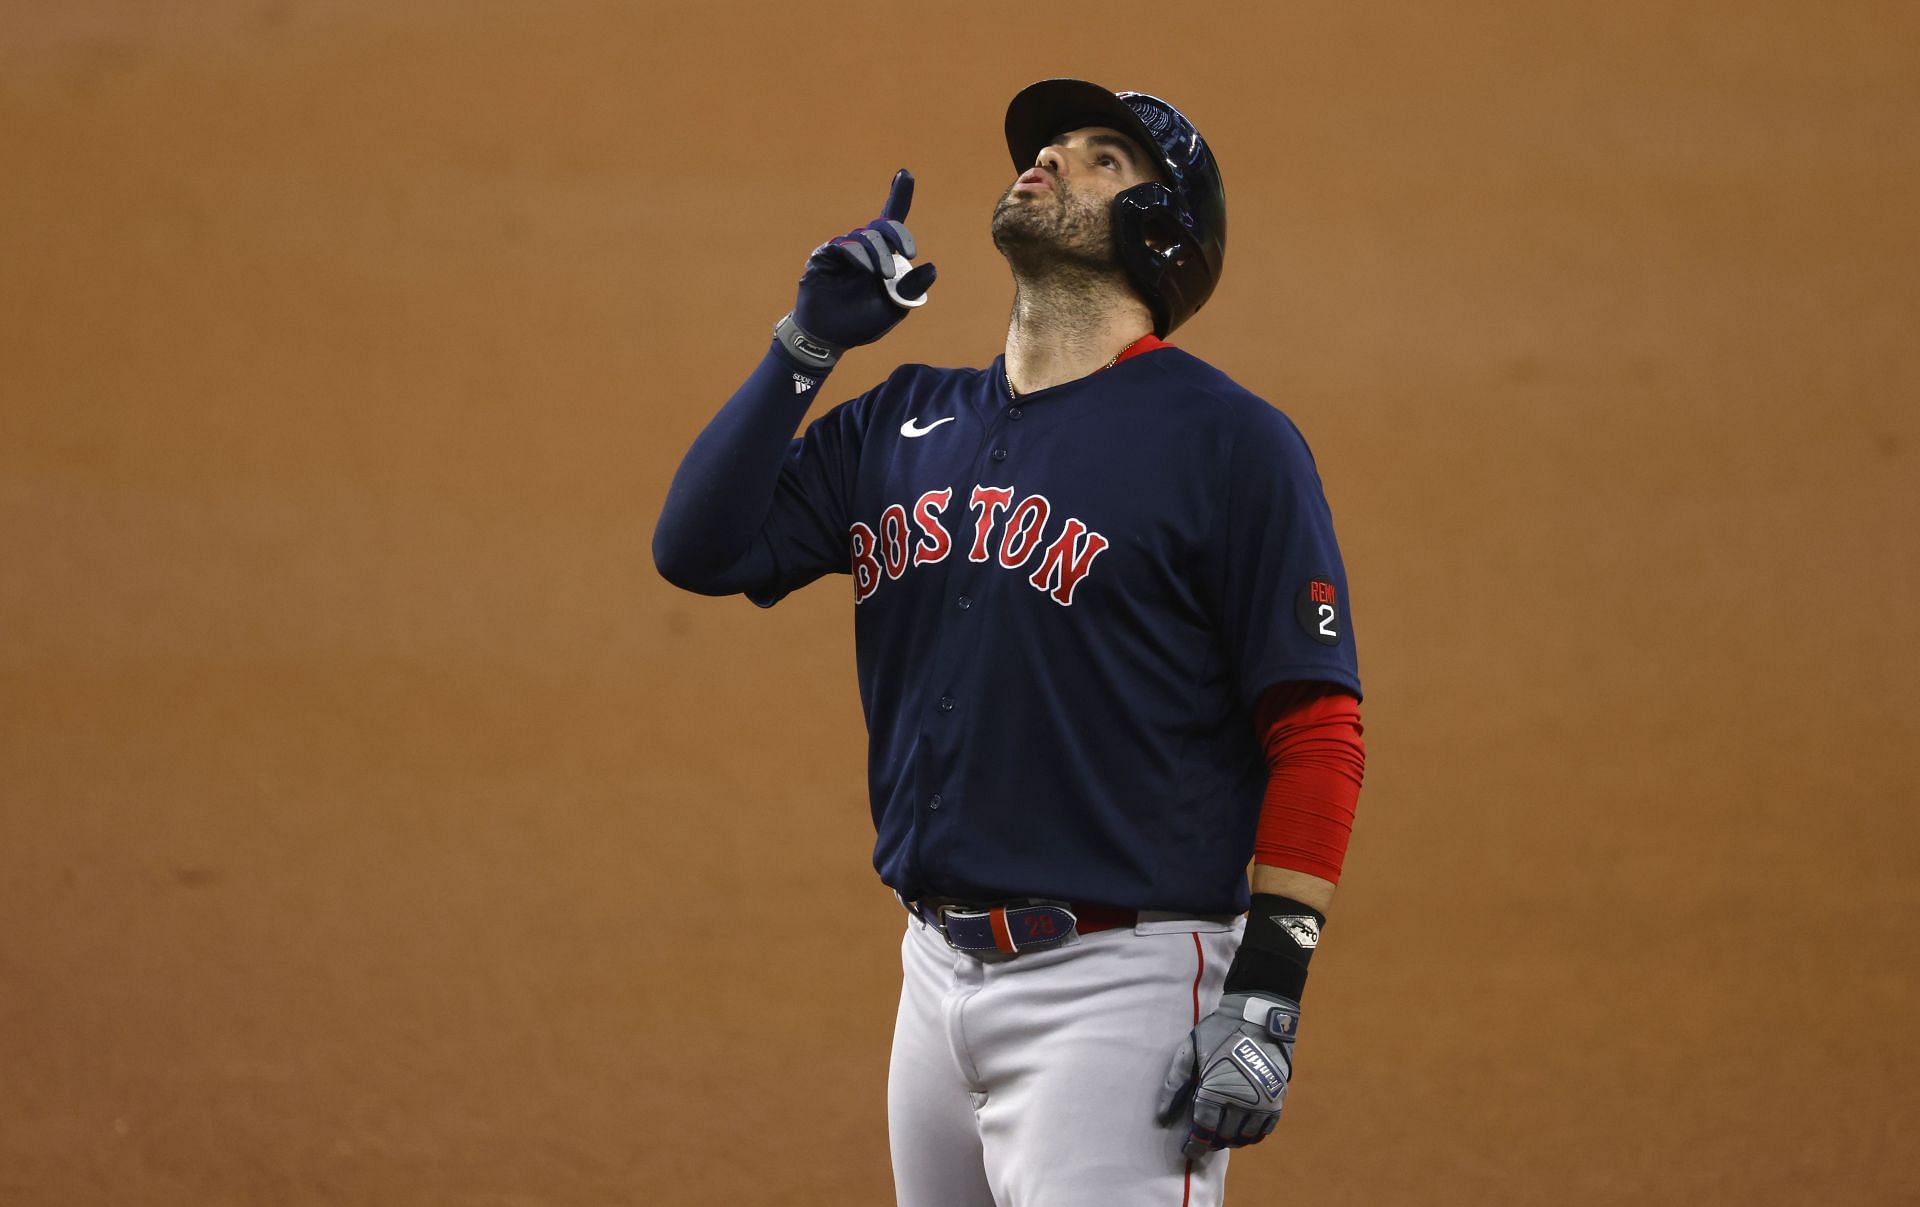 Boston Red Sox outfielder J.D. Martinez could bring back a handsome return for the Boston Red Sox this season.